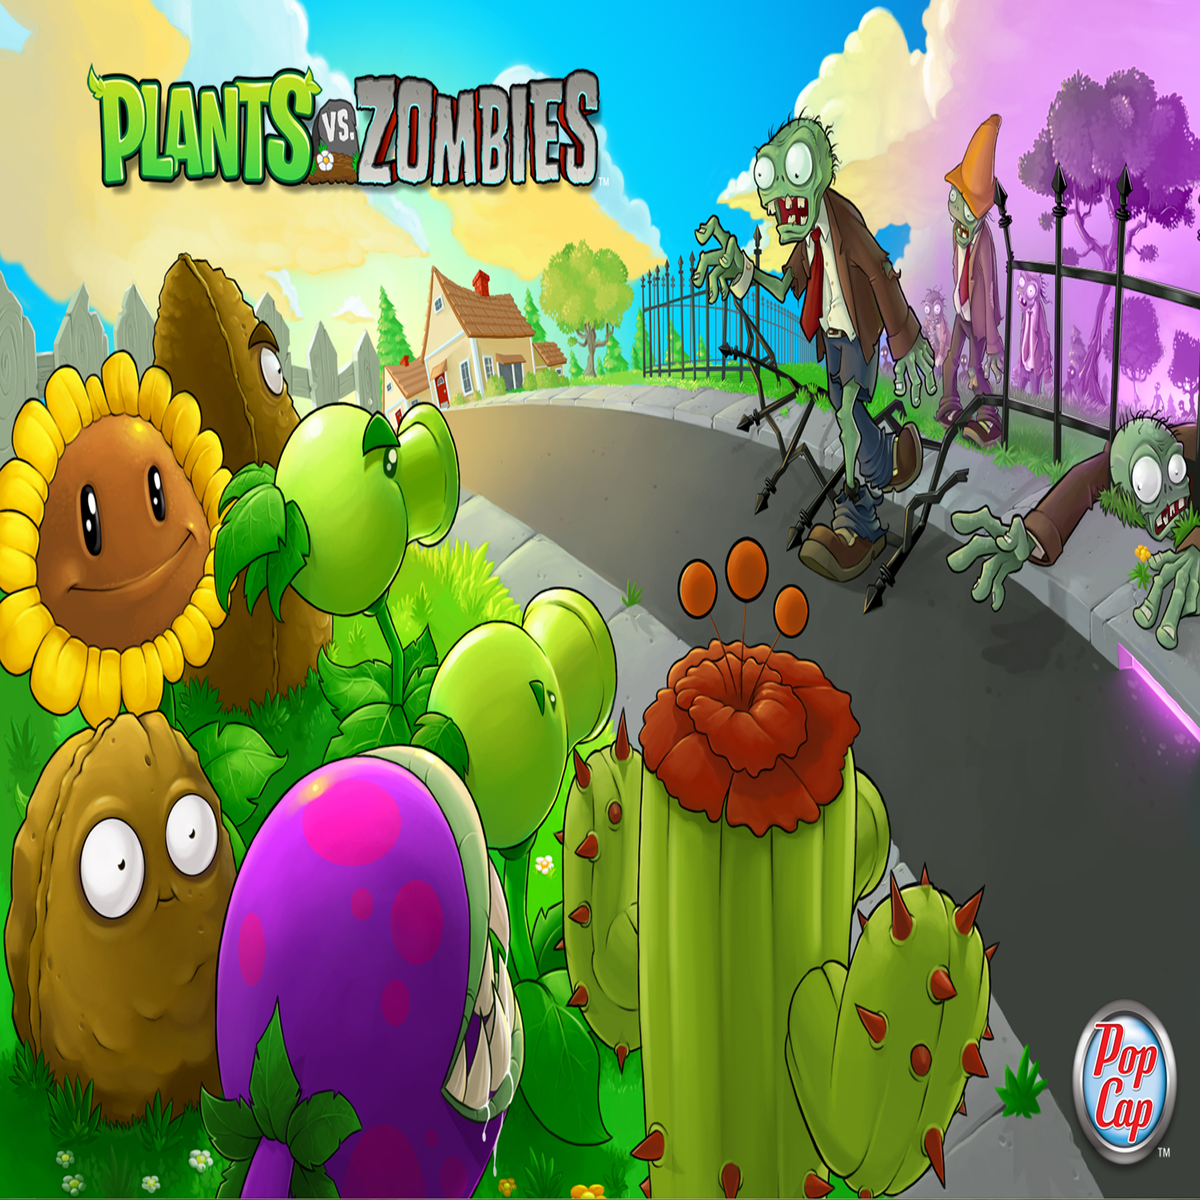 How Plants V Zombies 2 will be monetised